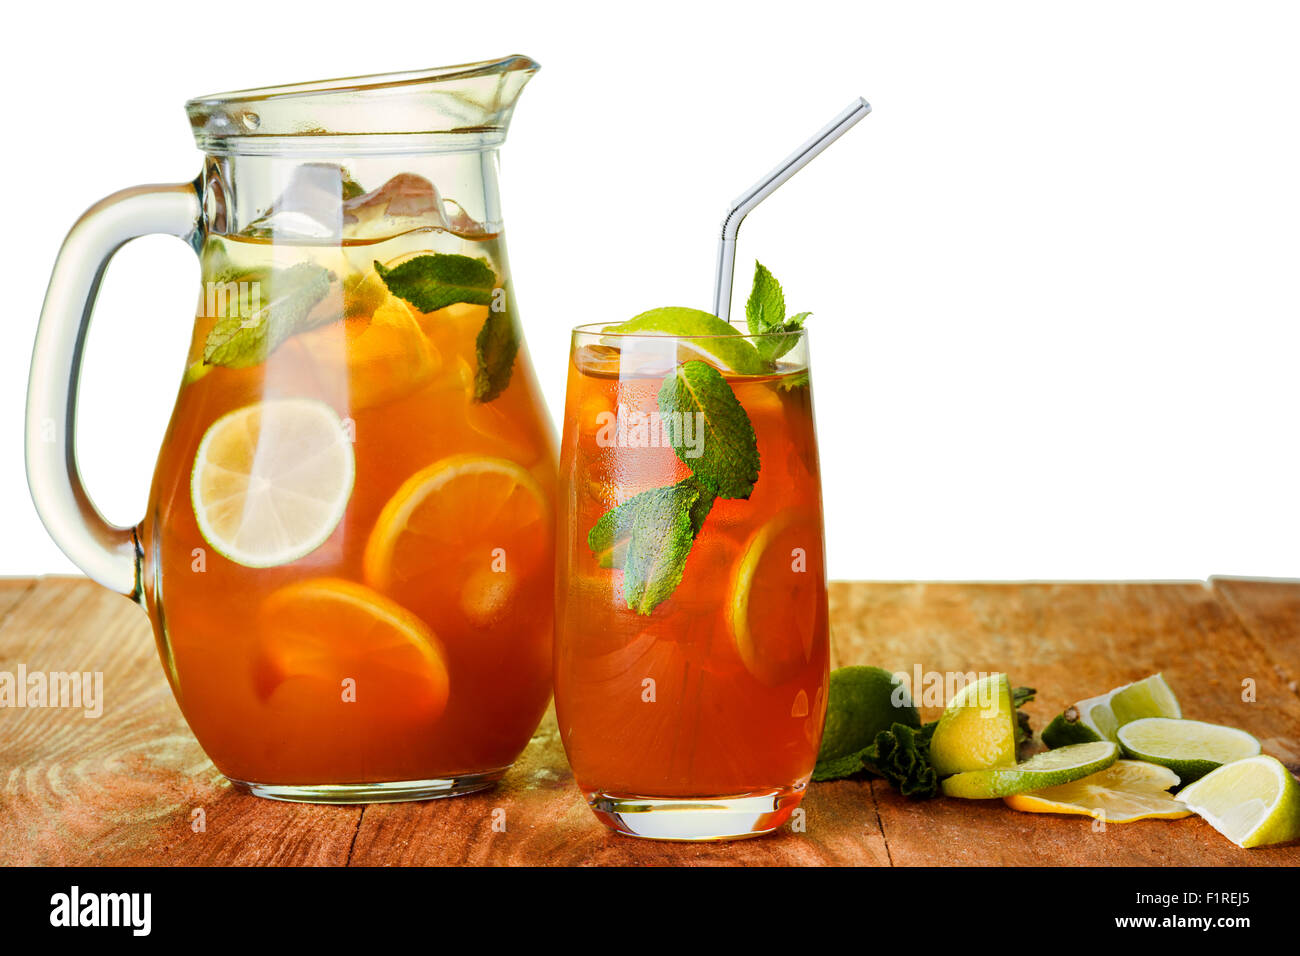 https://c8.alamy.com/comp/F1REJ5/iced-tea-in-the-pitcher-and-the-glass-jug-of-cold-iced-drink-with-F1REJ5.jpg